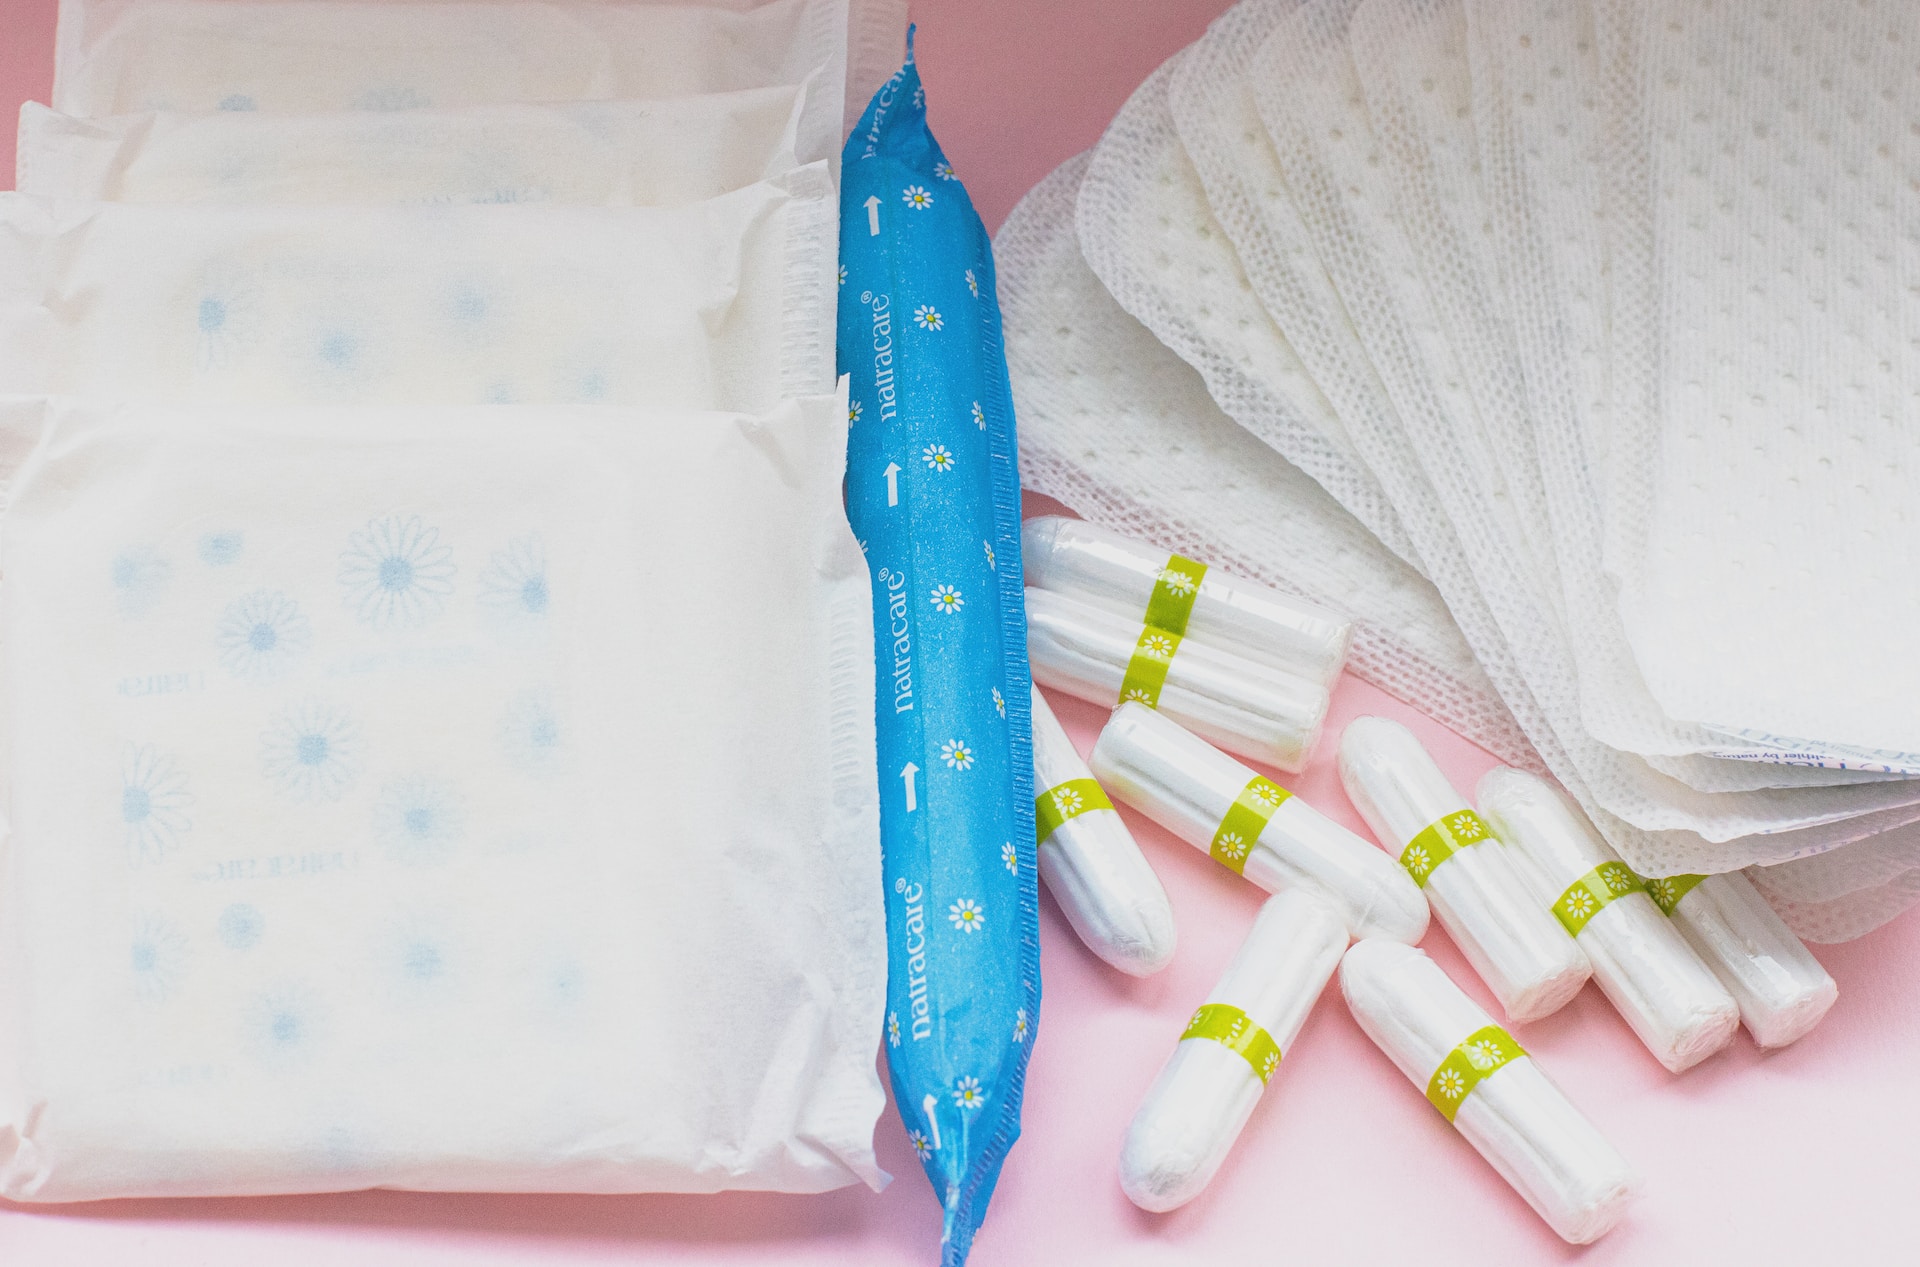 A Comprehensive Guide to Using Tampons: Harness the Convenience and Sustainability of the Reusable Applicator Kit with Refills, Liners, and Pads